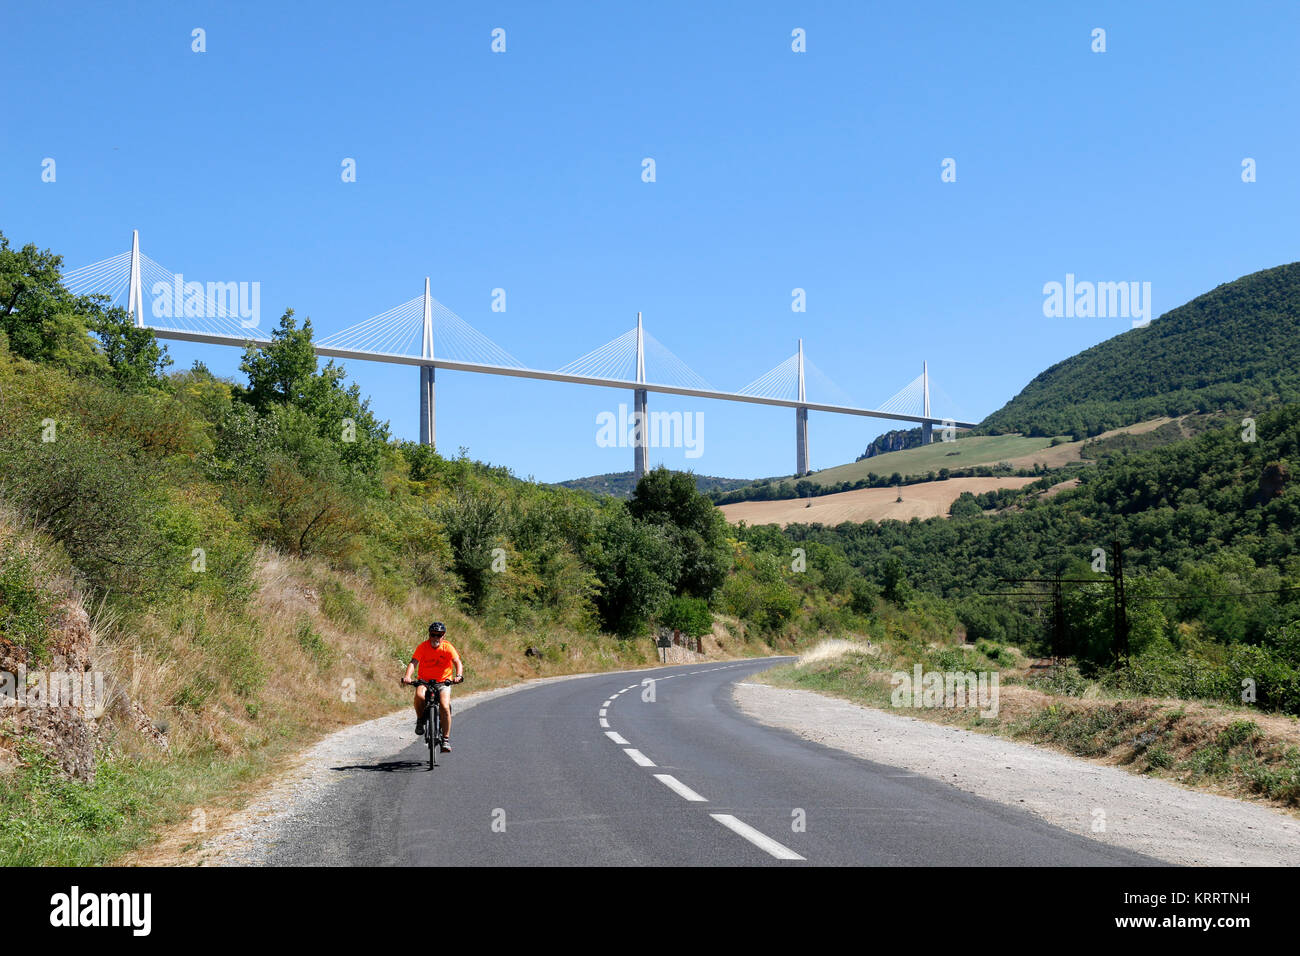 Millau Viaduct, Aveyron, France with cyclist in foreground. The tallest bridge in the world, designed by Norman Foster. Stock Photo